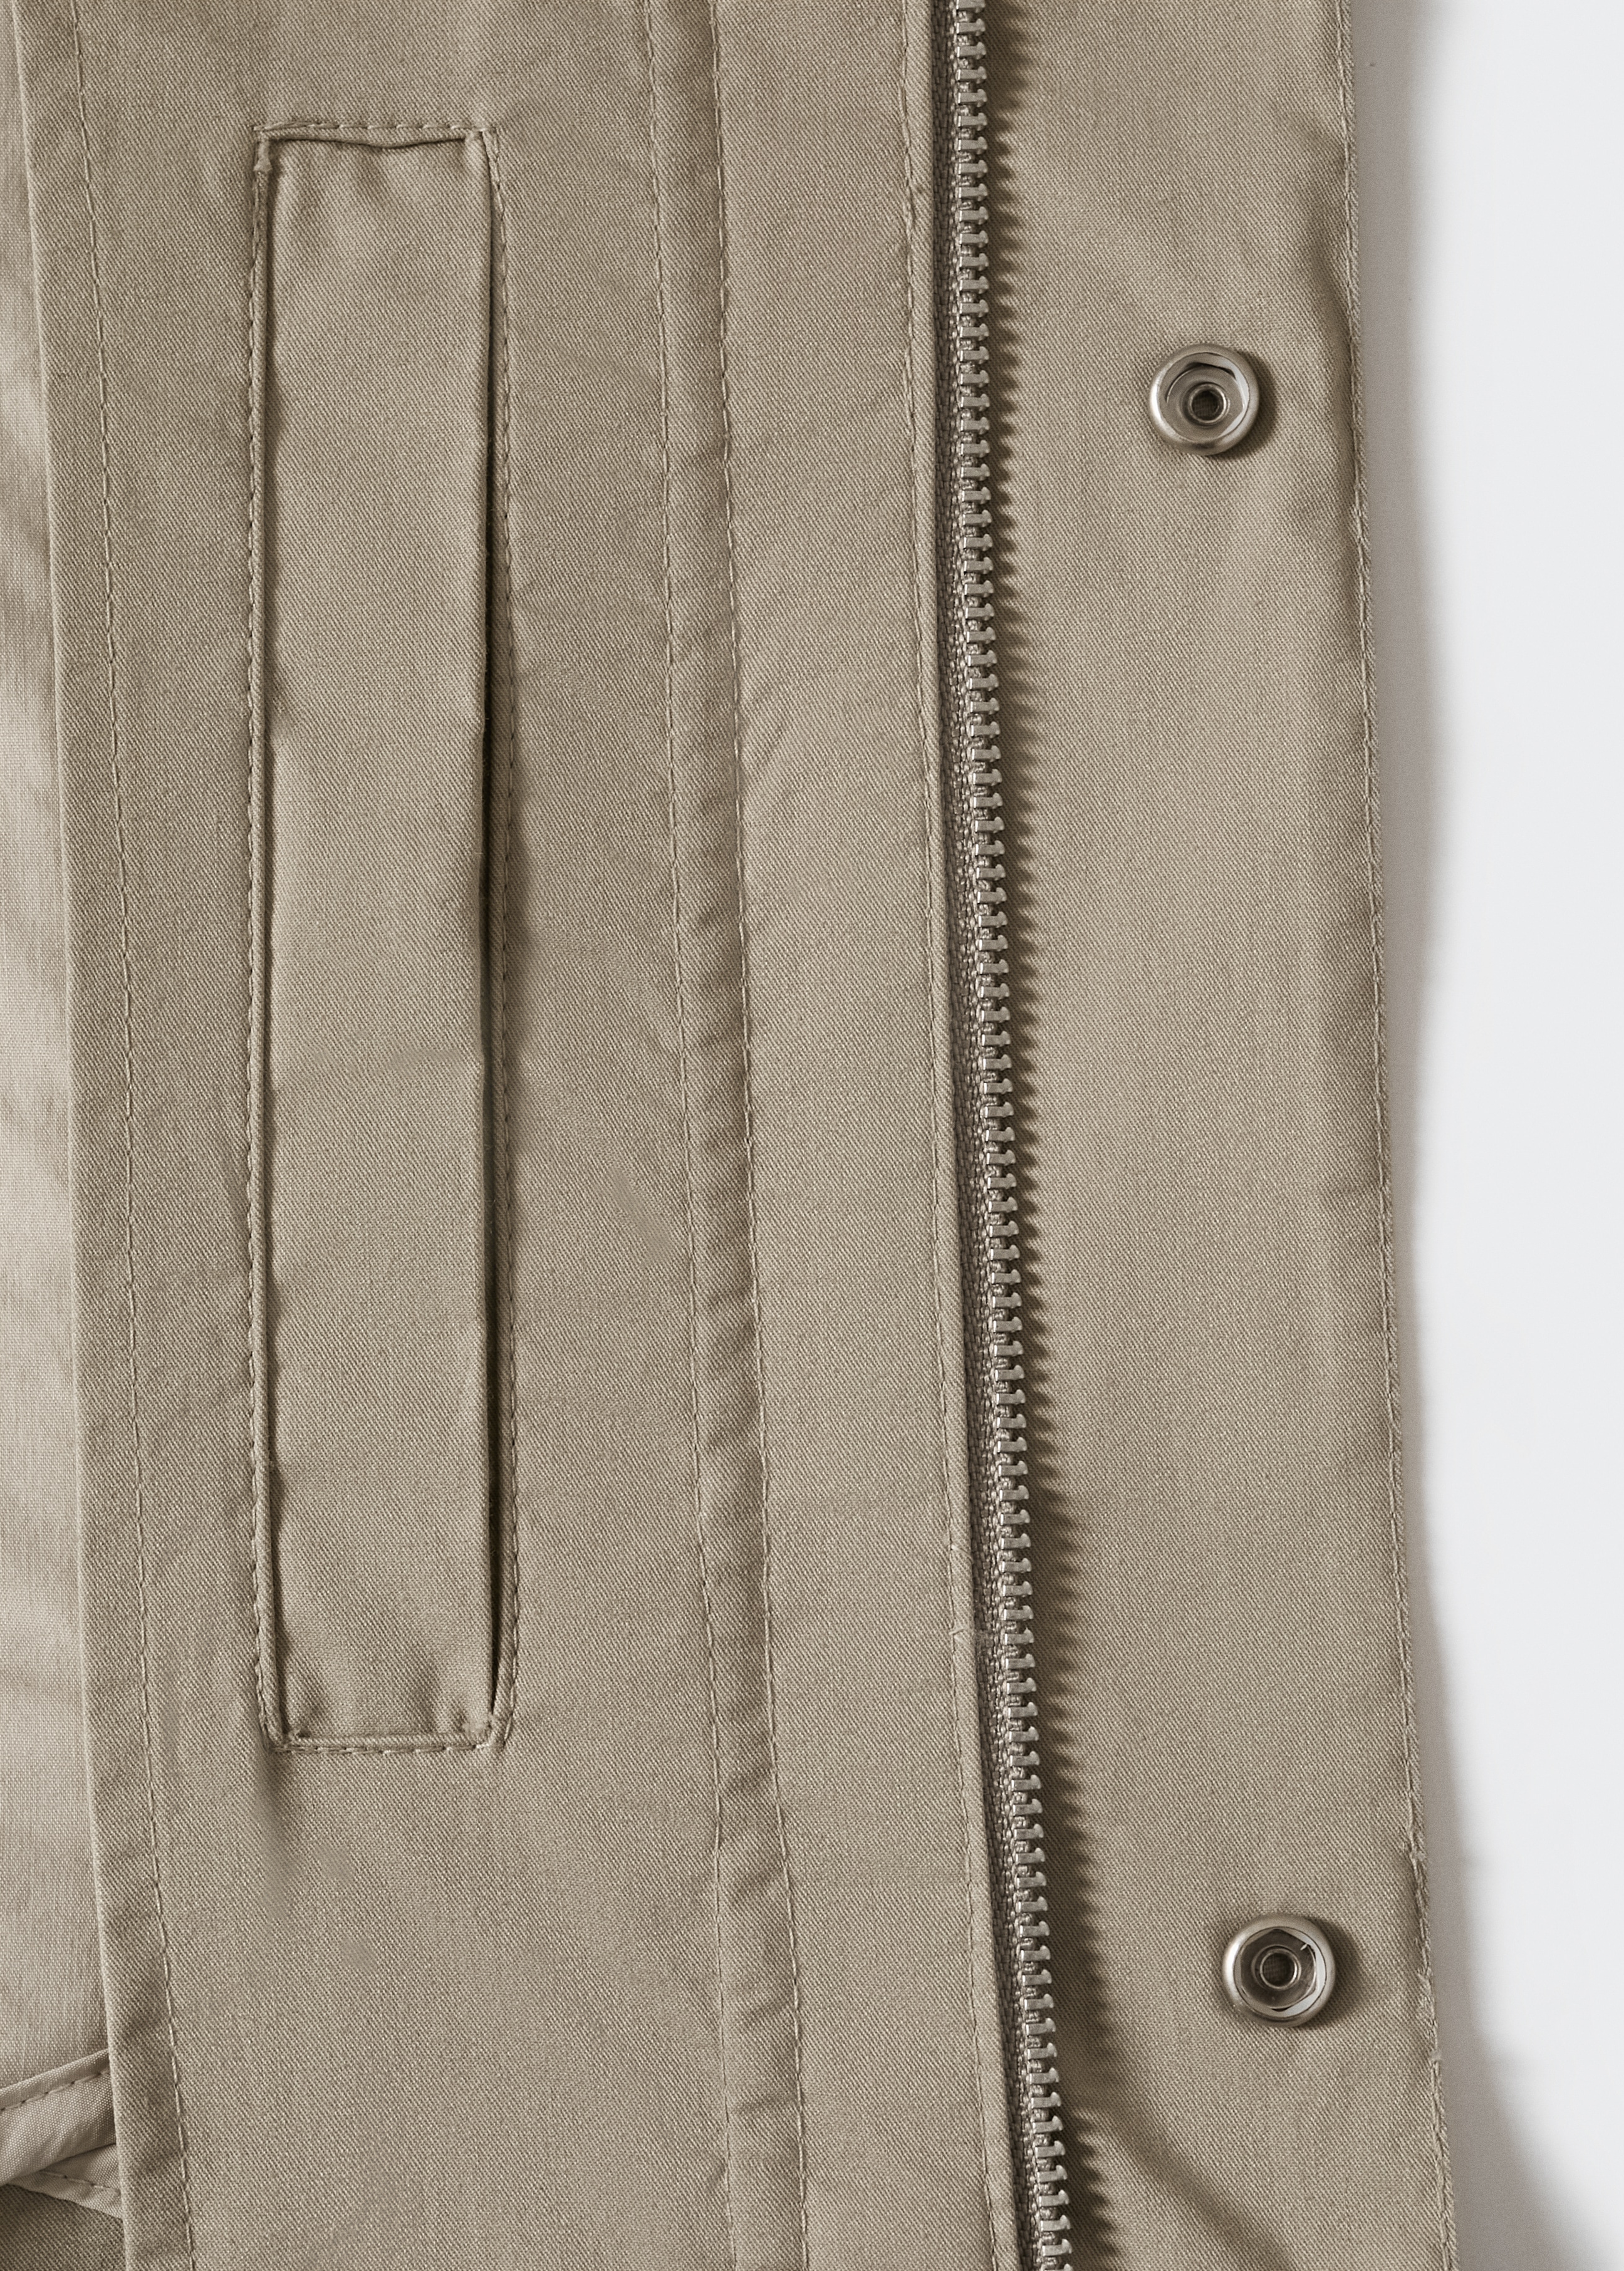 Cotton bomber jacket - Details of the article 7